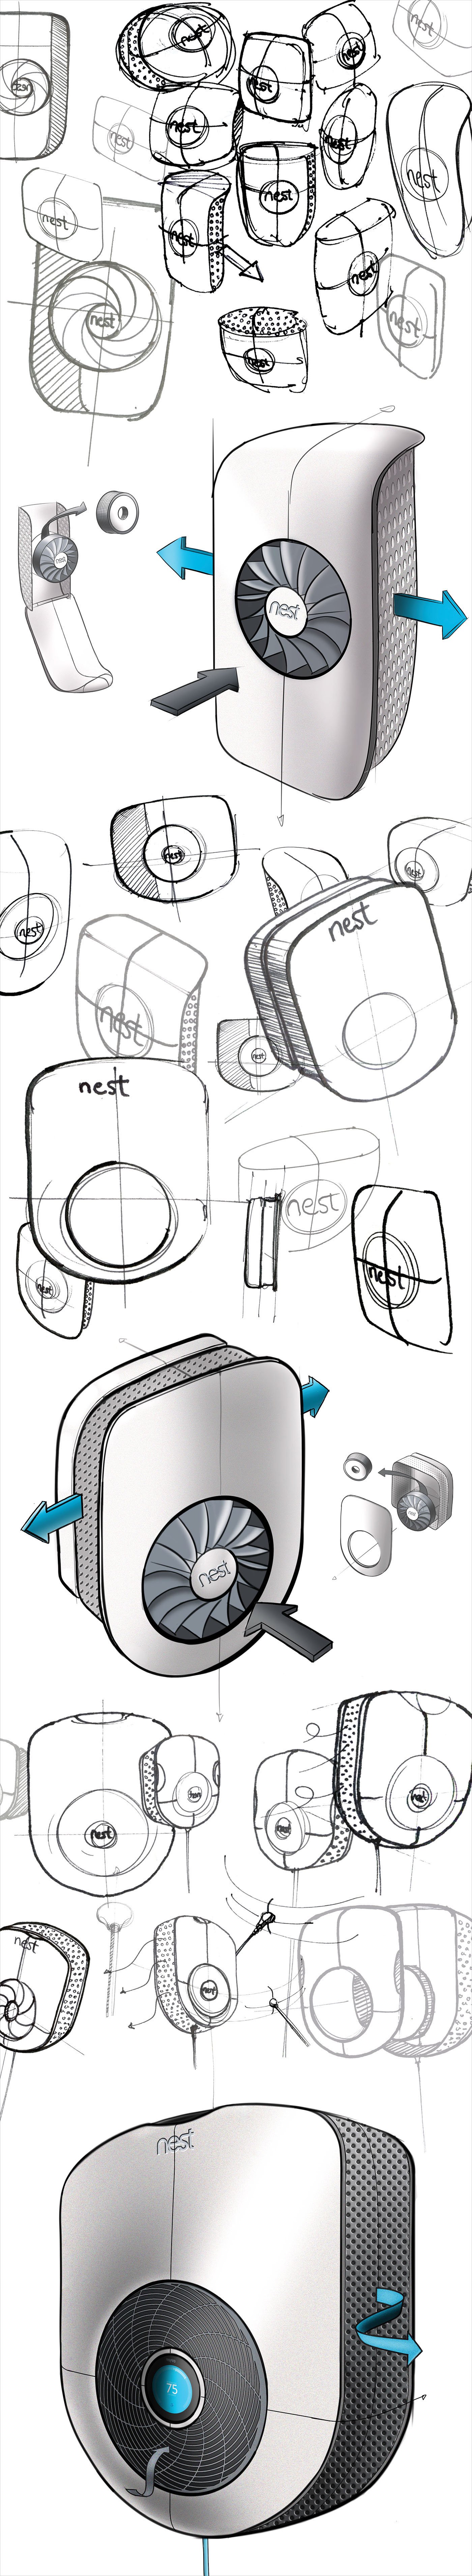 nest air purifier air purifier nest respire Nest Protect Nest thermostat Home products product design Interior sketching rendering model making